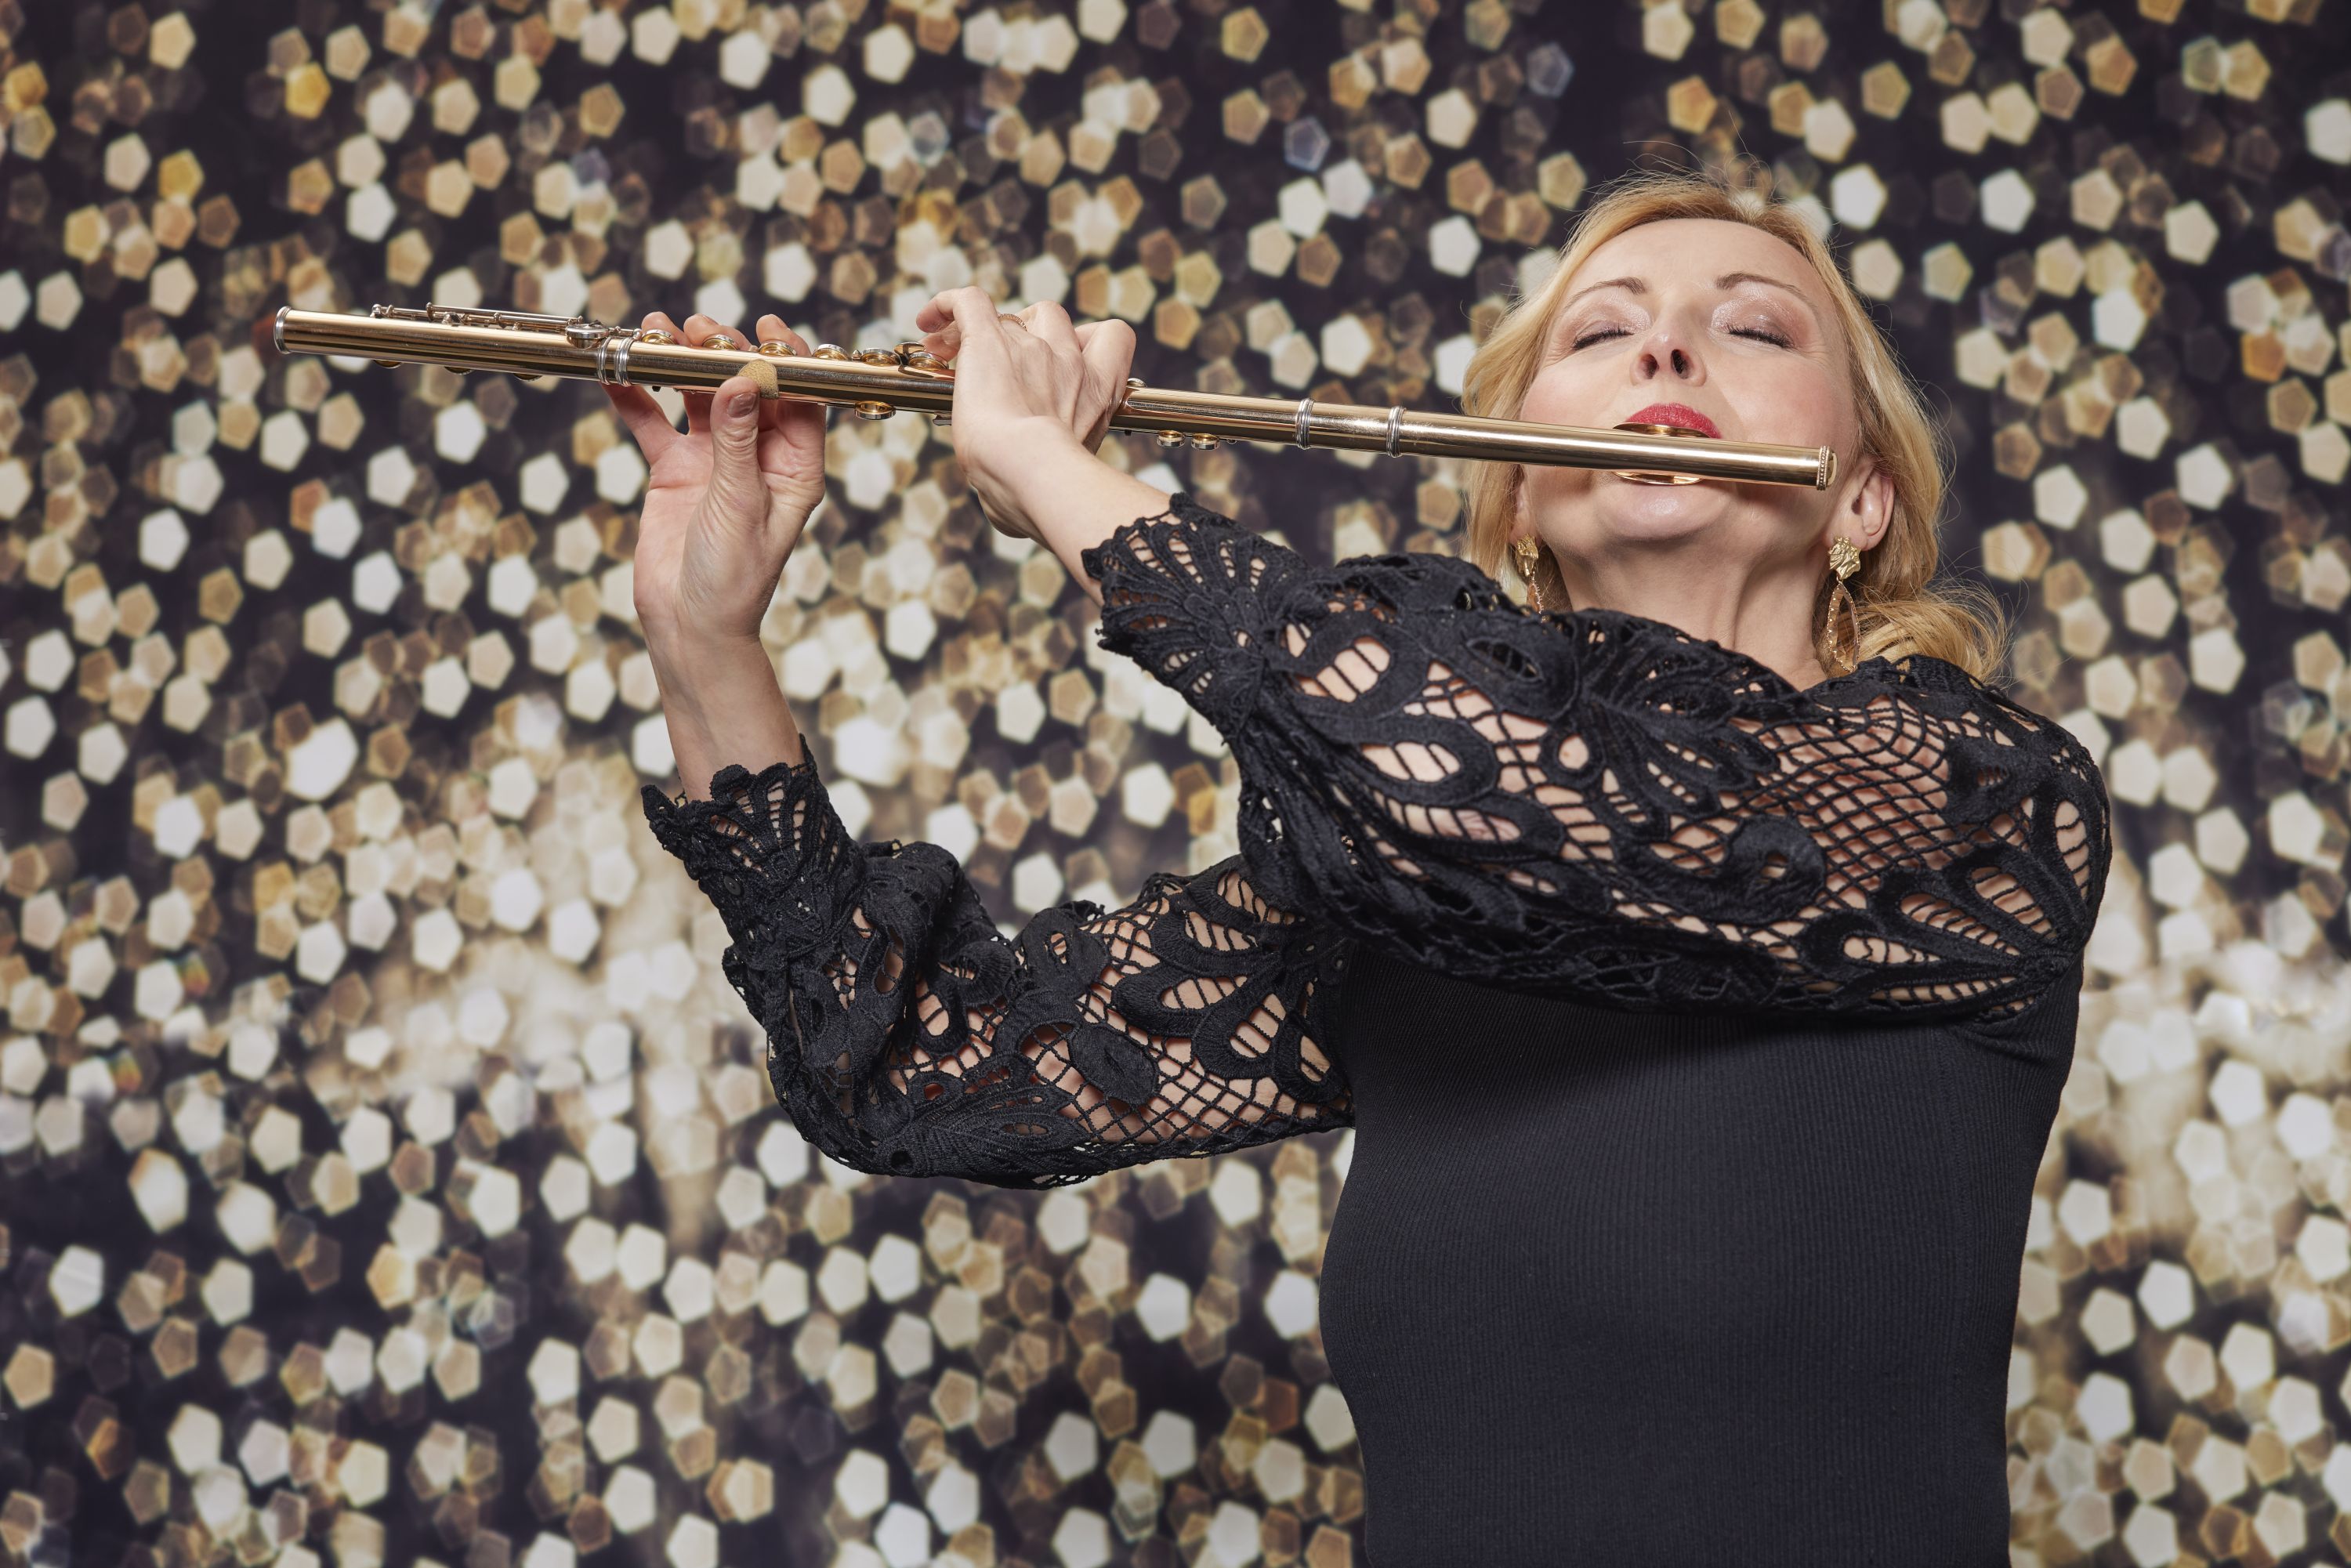 Anette Maiburg playing her flute with closed eyes